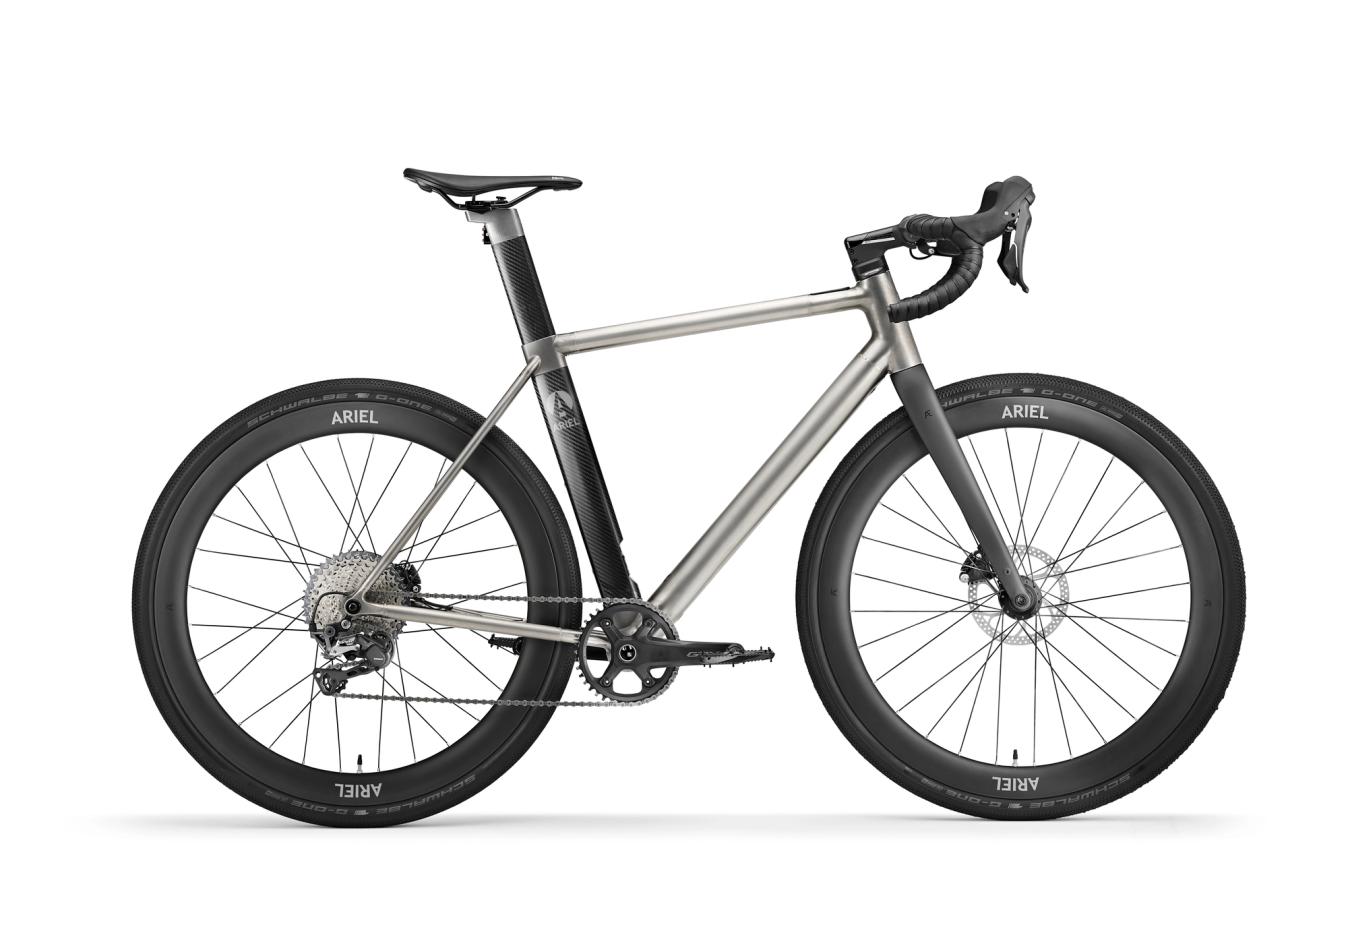 The Dash pulls on the brand's automotive expertise for the bikes design and consturction